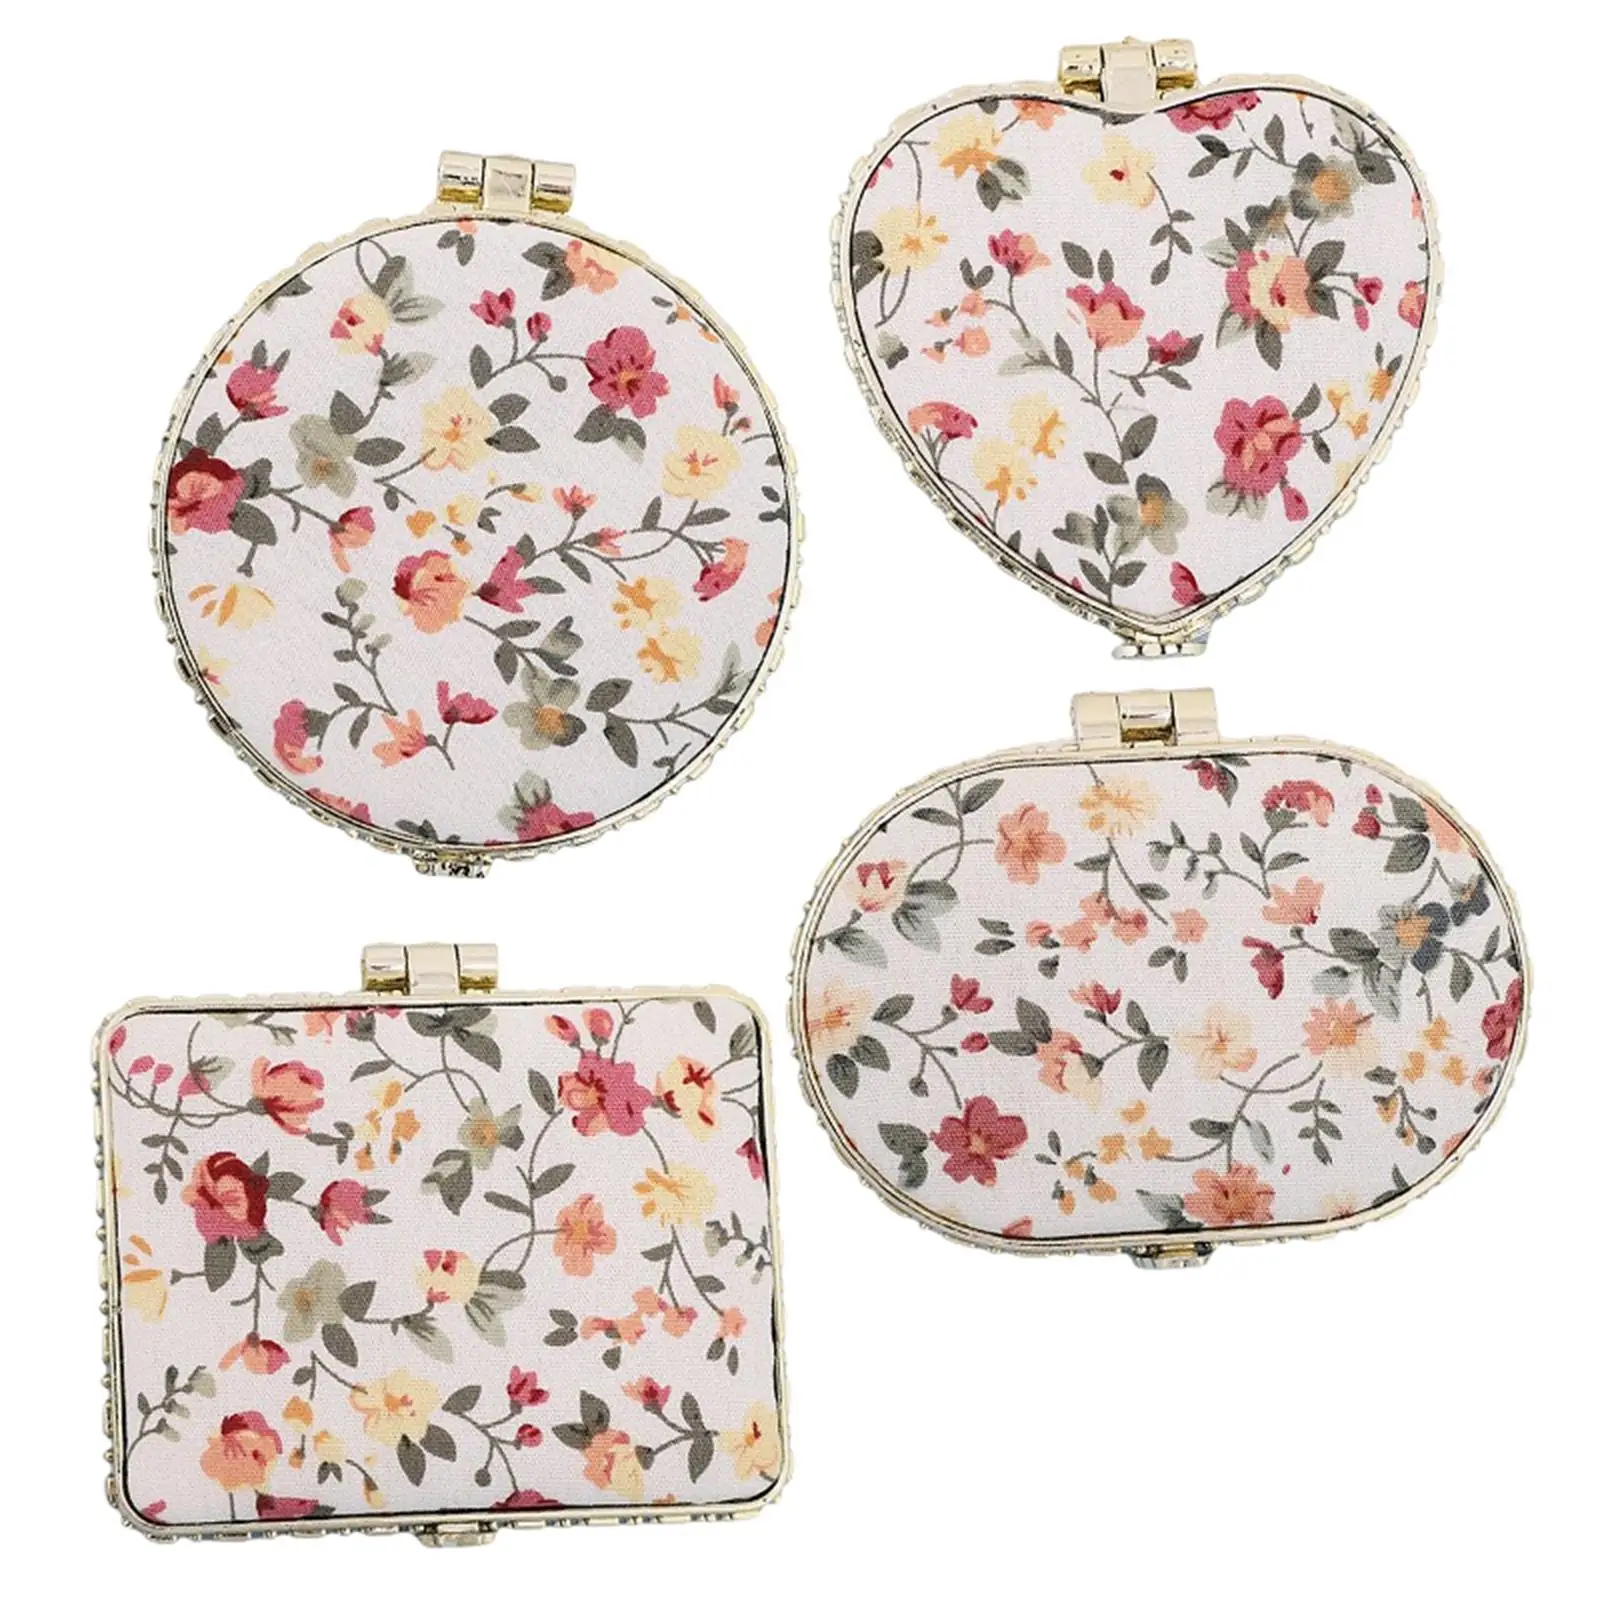 Compact Makeup Mirror Folding Mirror 2 Sided Floral Printed Foldable Pocket Handbag Mirror Beauty Mirror for Purse Travel Office